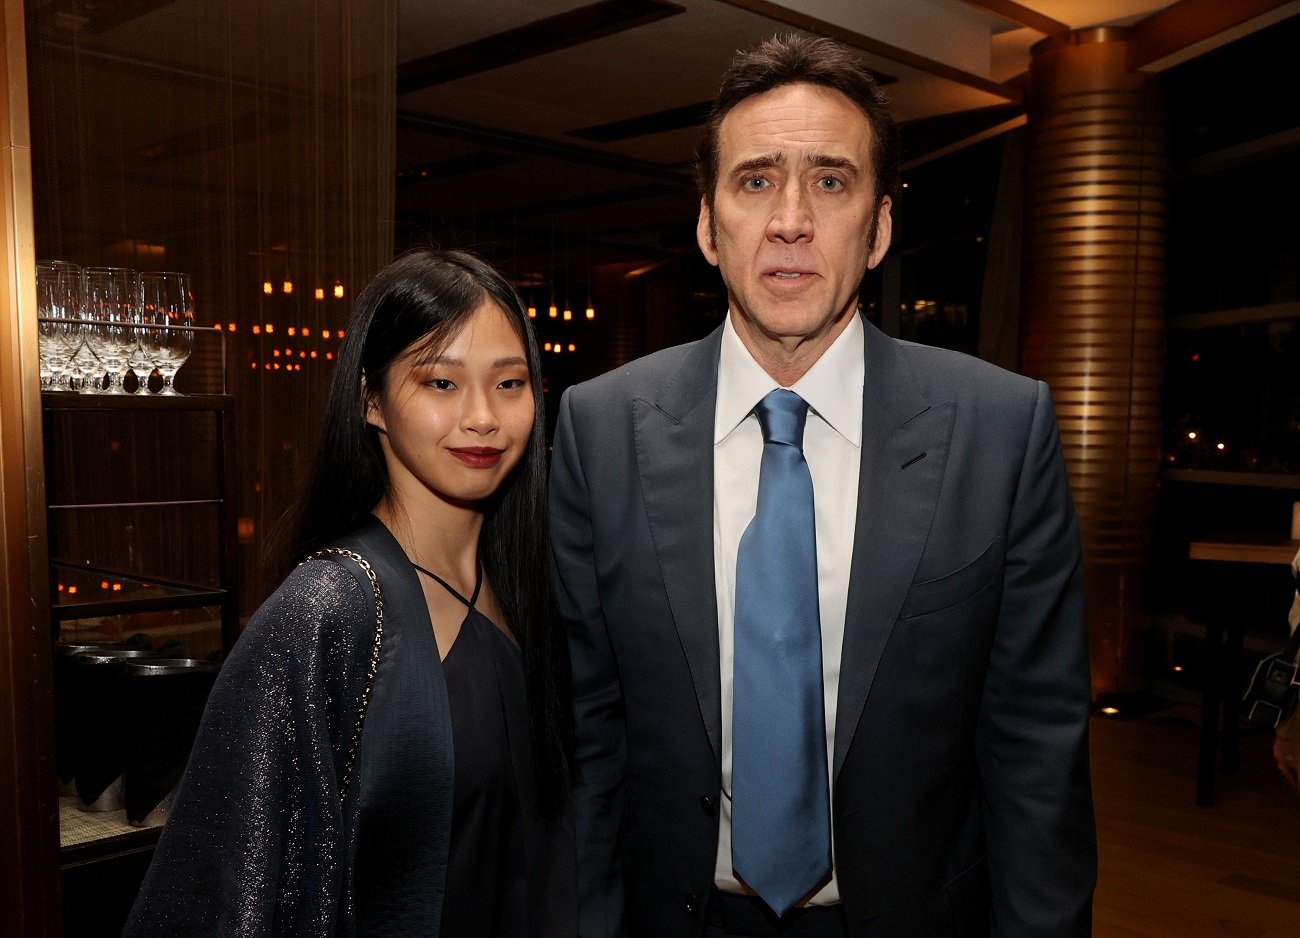 What is the Age Difference Between Nicolas Cage and Riko Shibata?